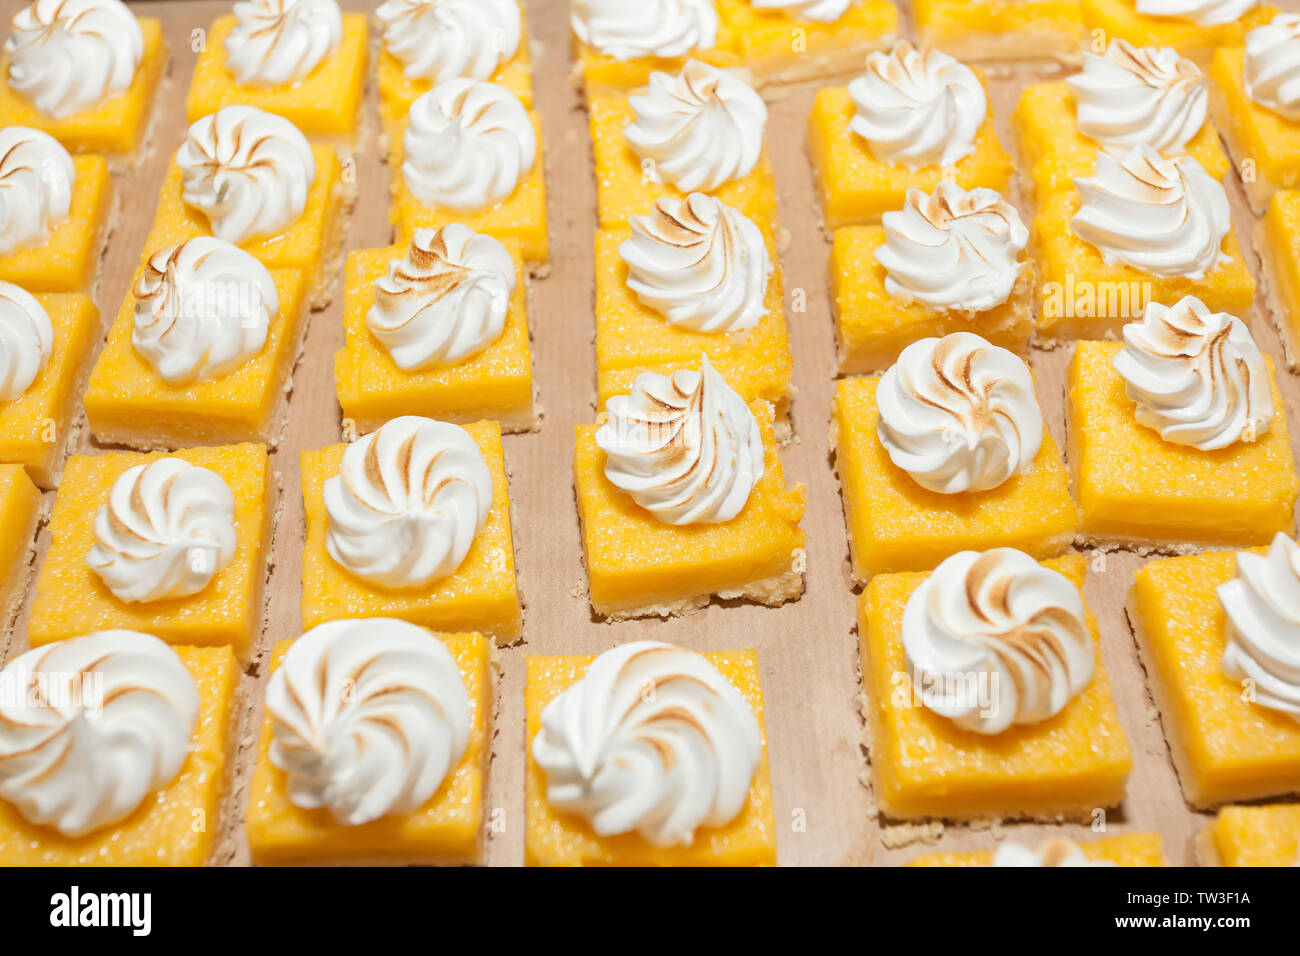 Custard pie with meringue lined up decorated on dessert buffet. Sweet paradise. Stock Photo